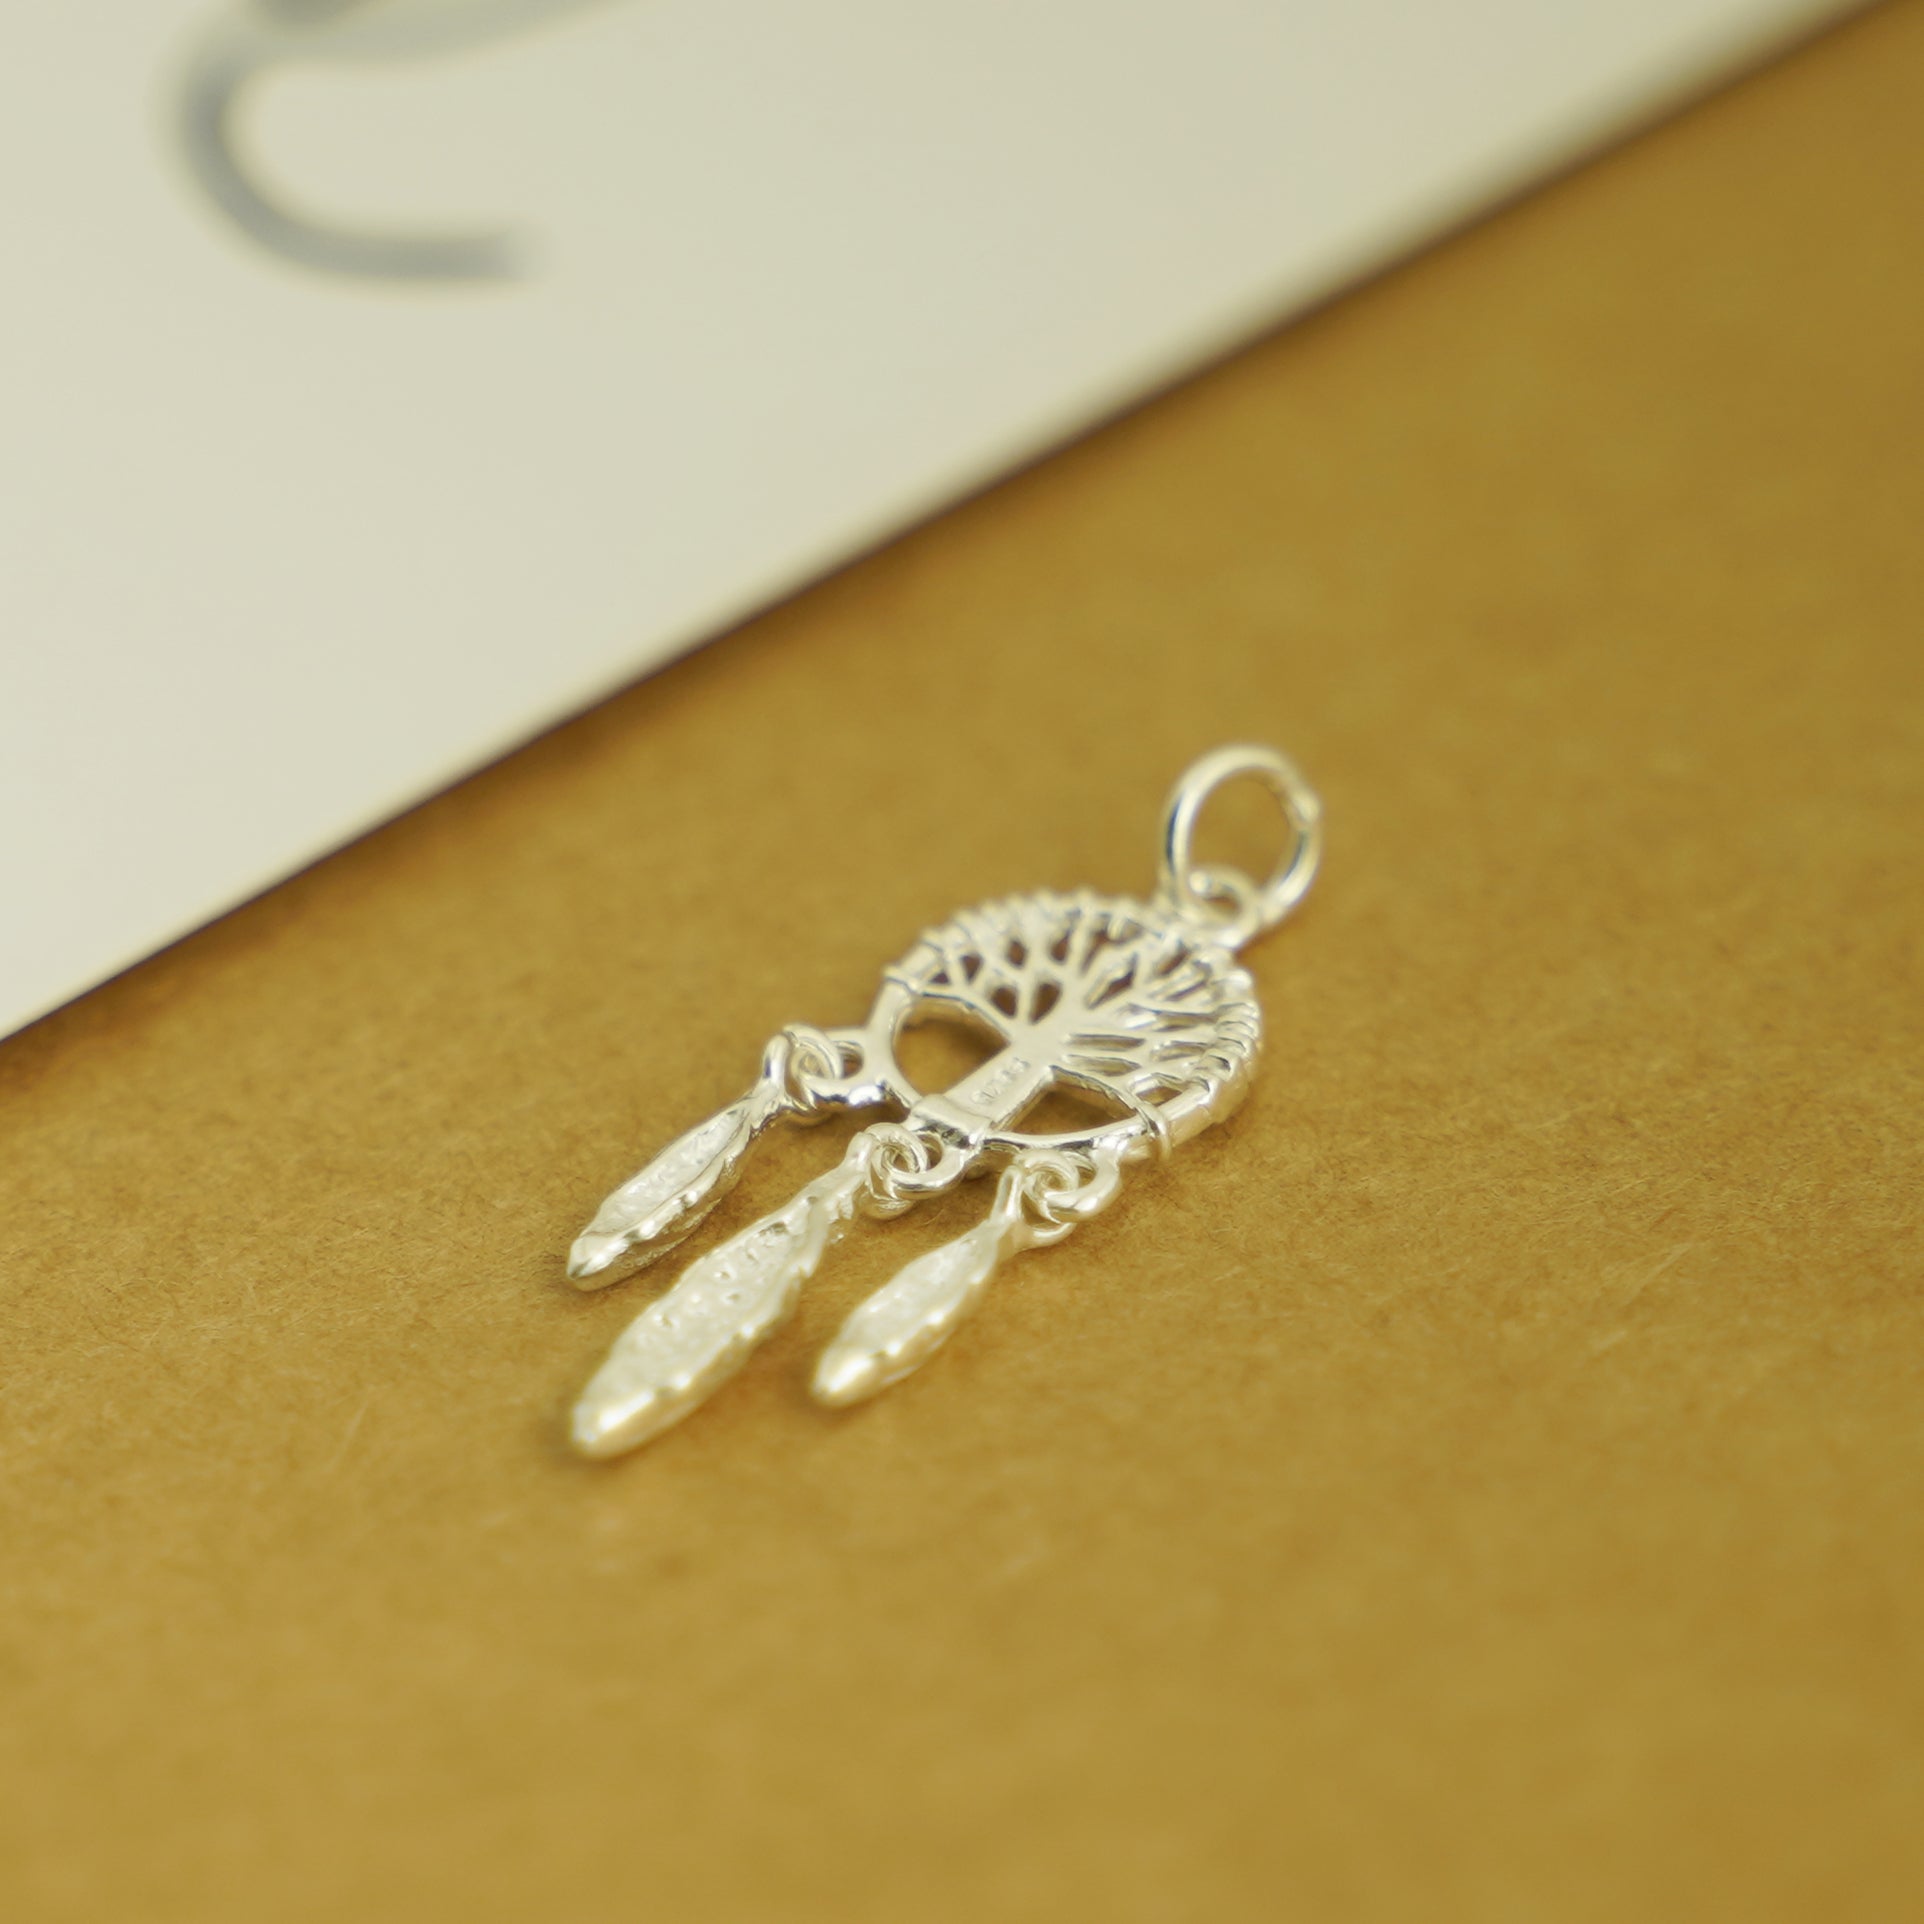 Sterling Silver Tree of Life Pendant with Dream Catcher, Heart, and Feather Charms - sugarkittenlondon